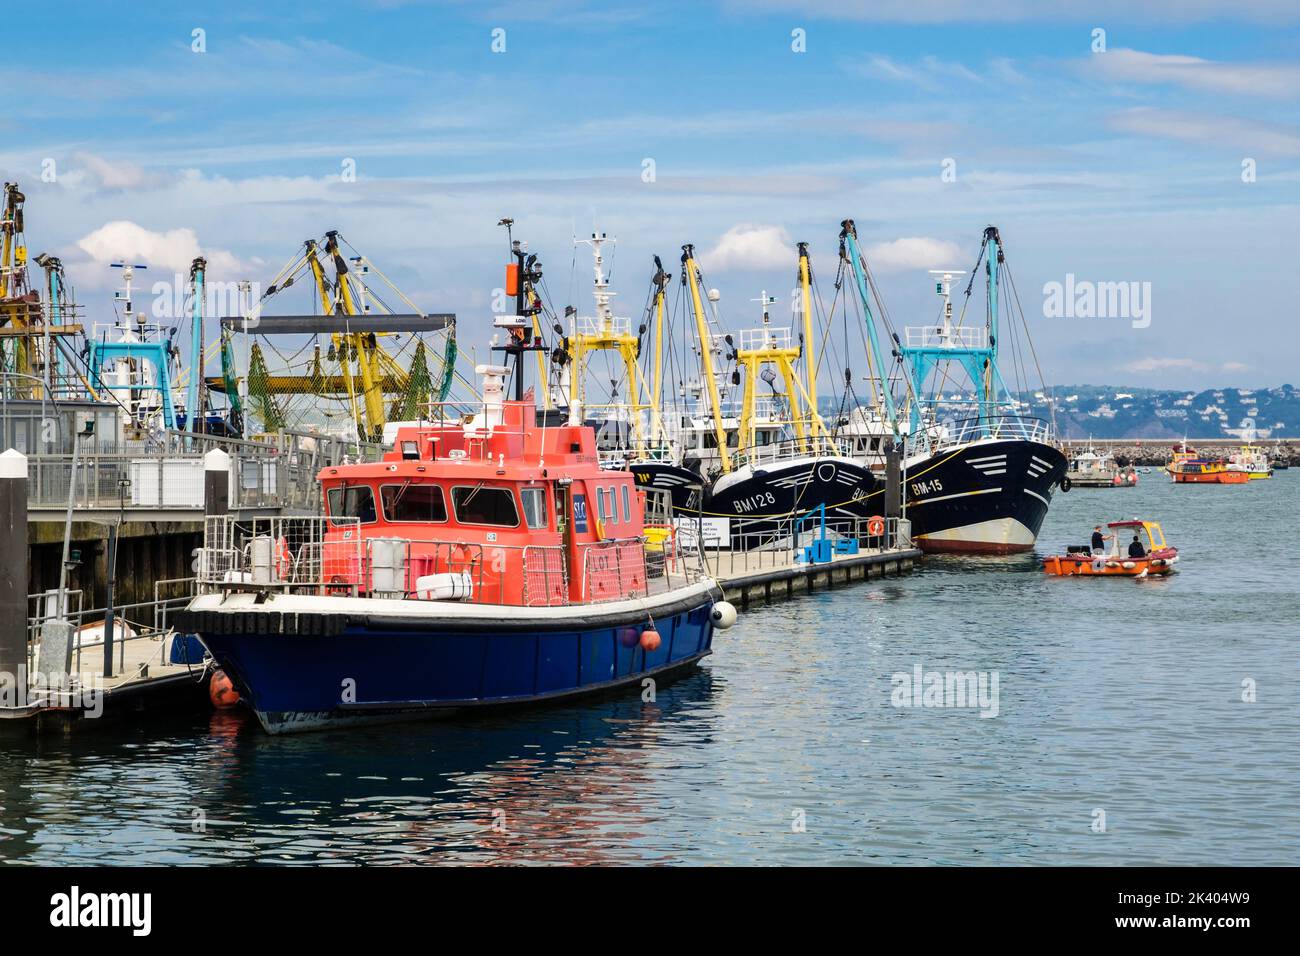 Pilot boat and commercial fishing fleet in port in the outer harbour. Brixham, Devon, England, UK, Britain Stock Photo